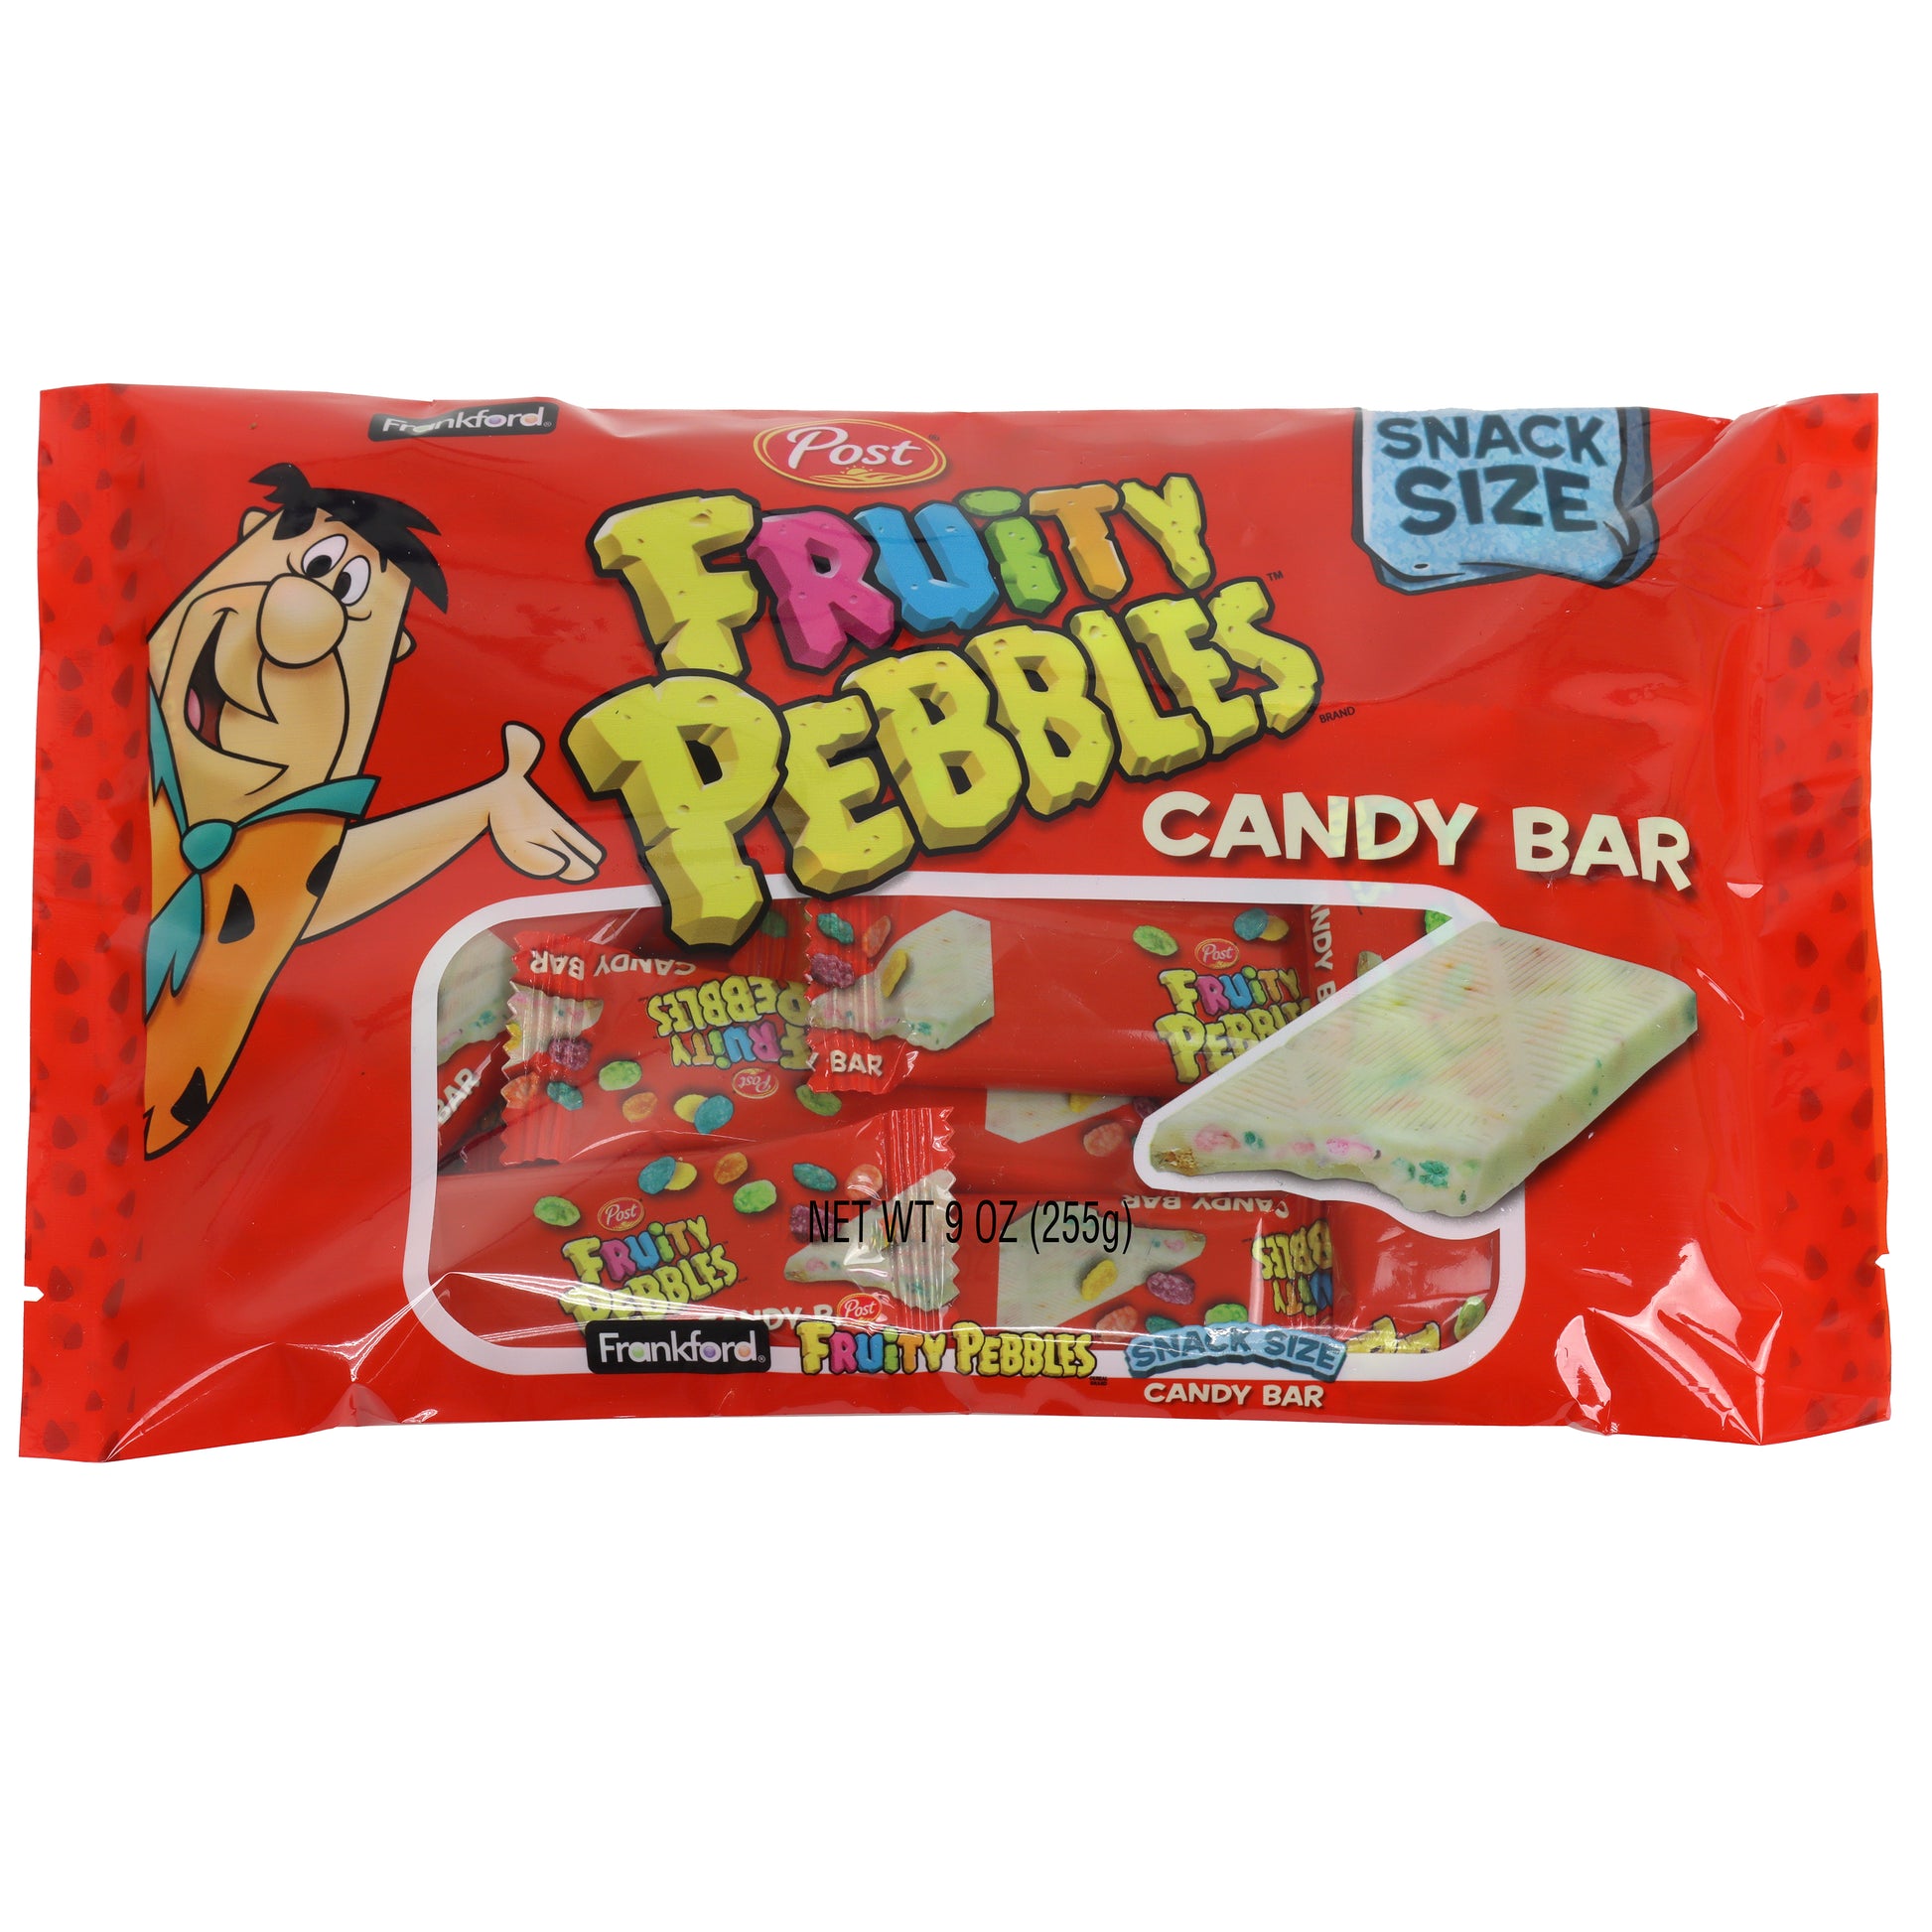 Fruity Pebbles & Rice Krispies Cereal Snack Size Bag, Choice of 2